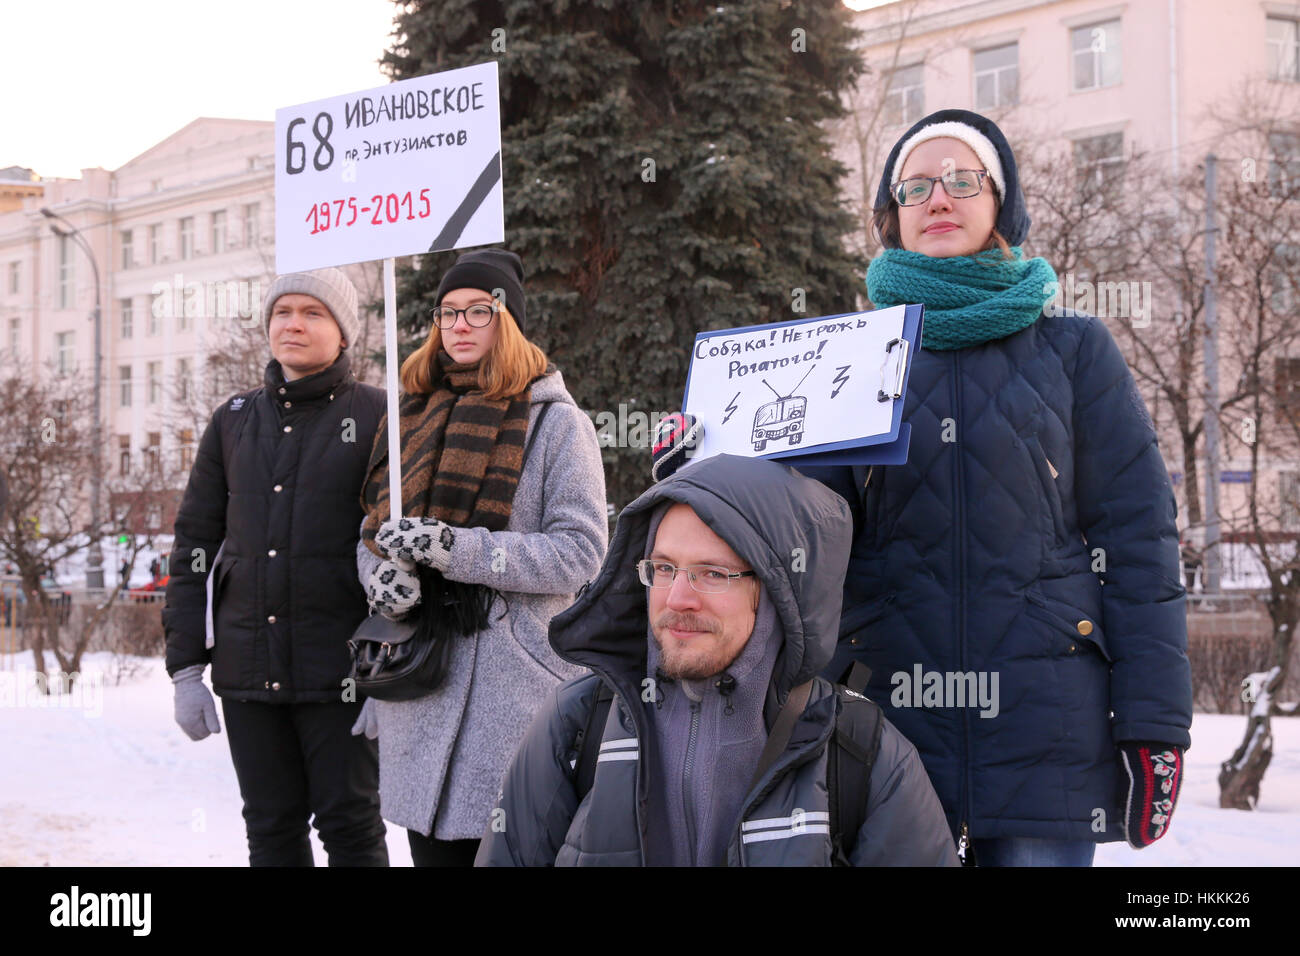 moscow-russia-29th-jan-2017-demonstrators-hold-placards-during-a-protest-HKKK26.jpg